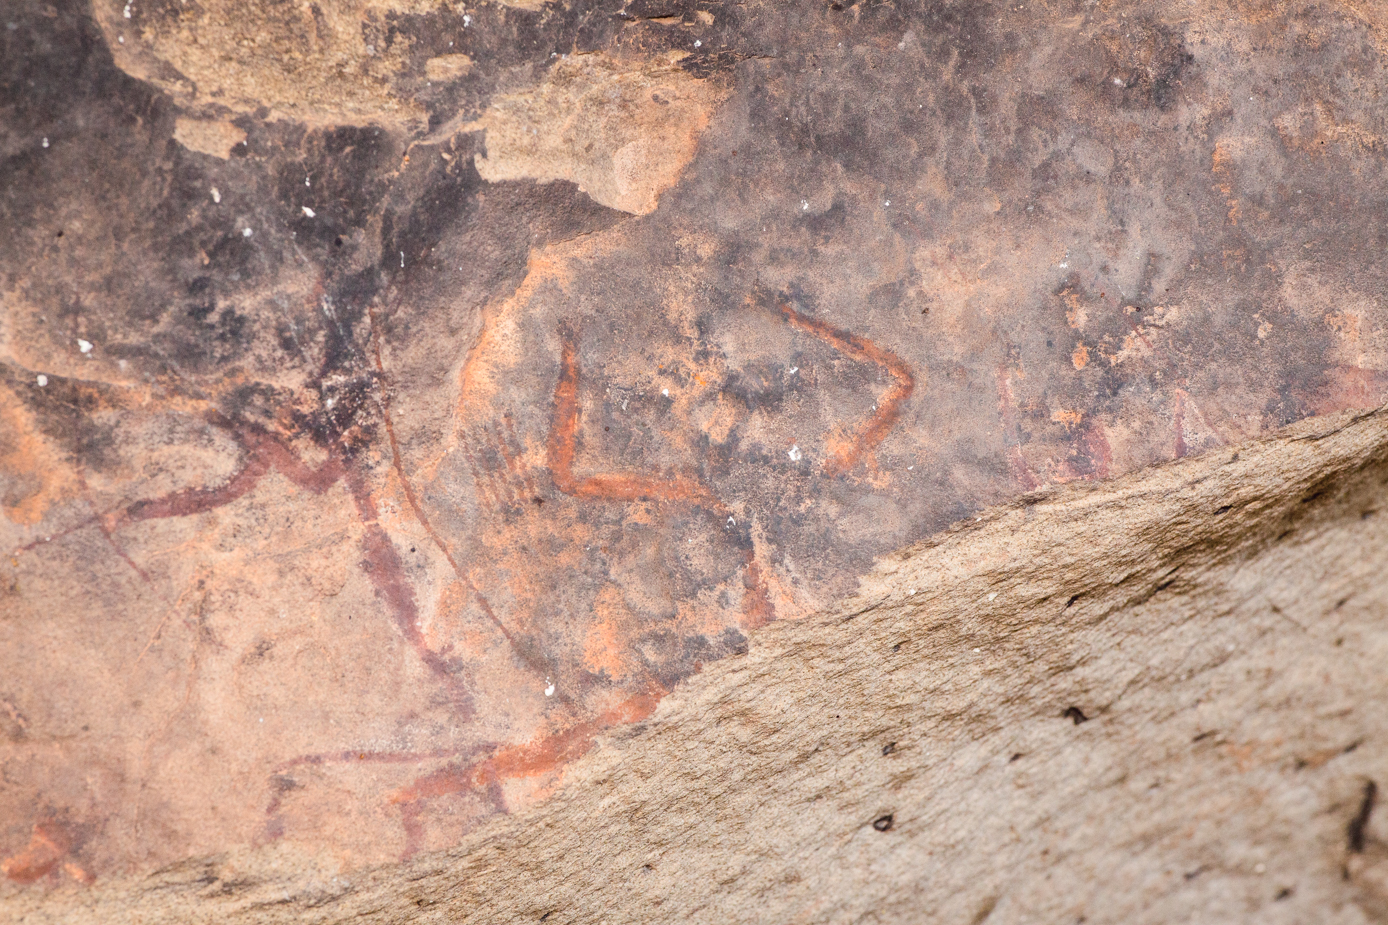 Facing this massive eland are a few human-like figures. A section of the rock on which they are painted has broken off so we cannot see much of them. But we can see a figure in red (the head is obscured) that is holding a strung bow and pointing it at the eland. Next to this is another larger figure in orange with its hands raised high and bent at the elbow. To the left is the figure's bow and arrows.